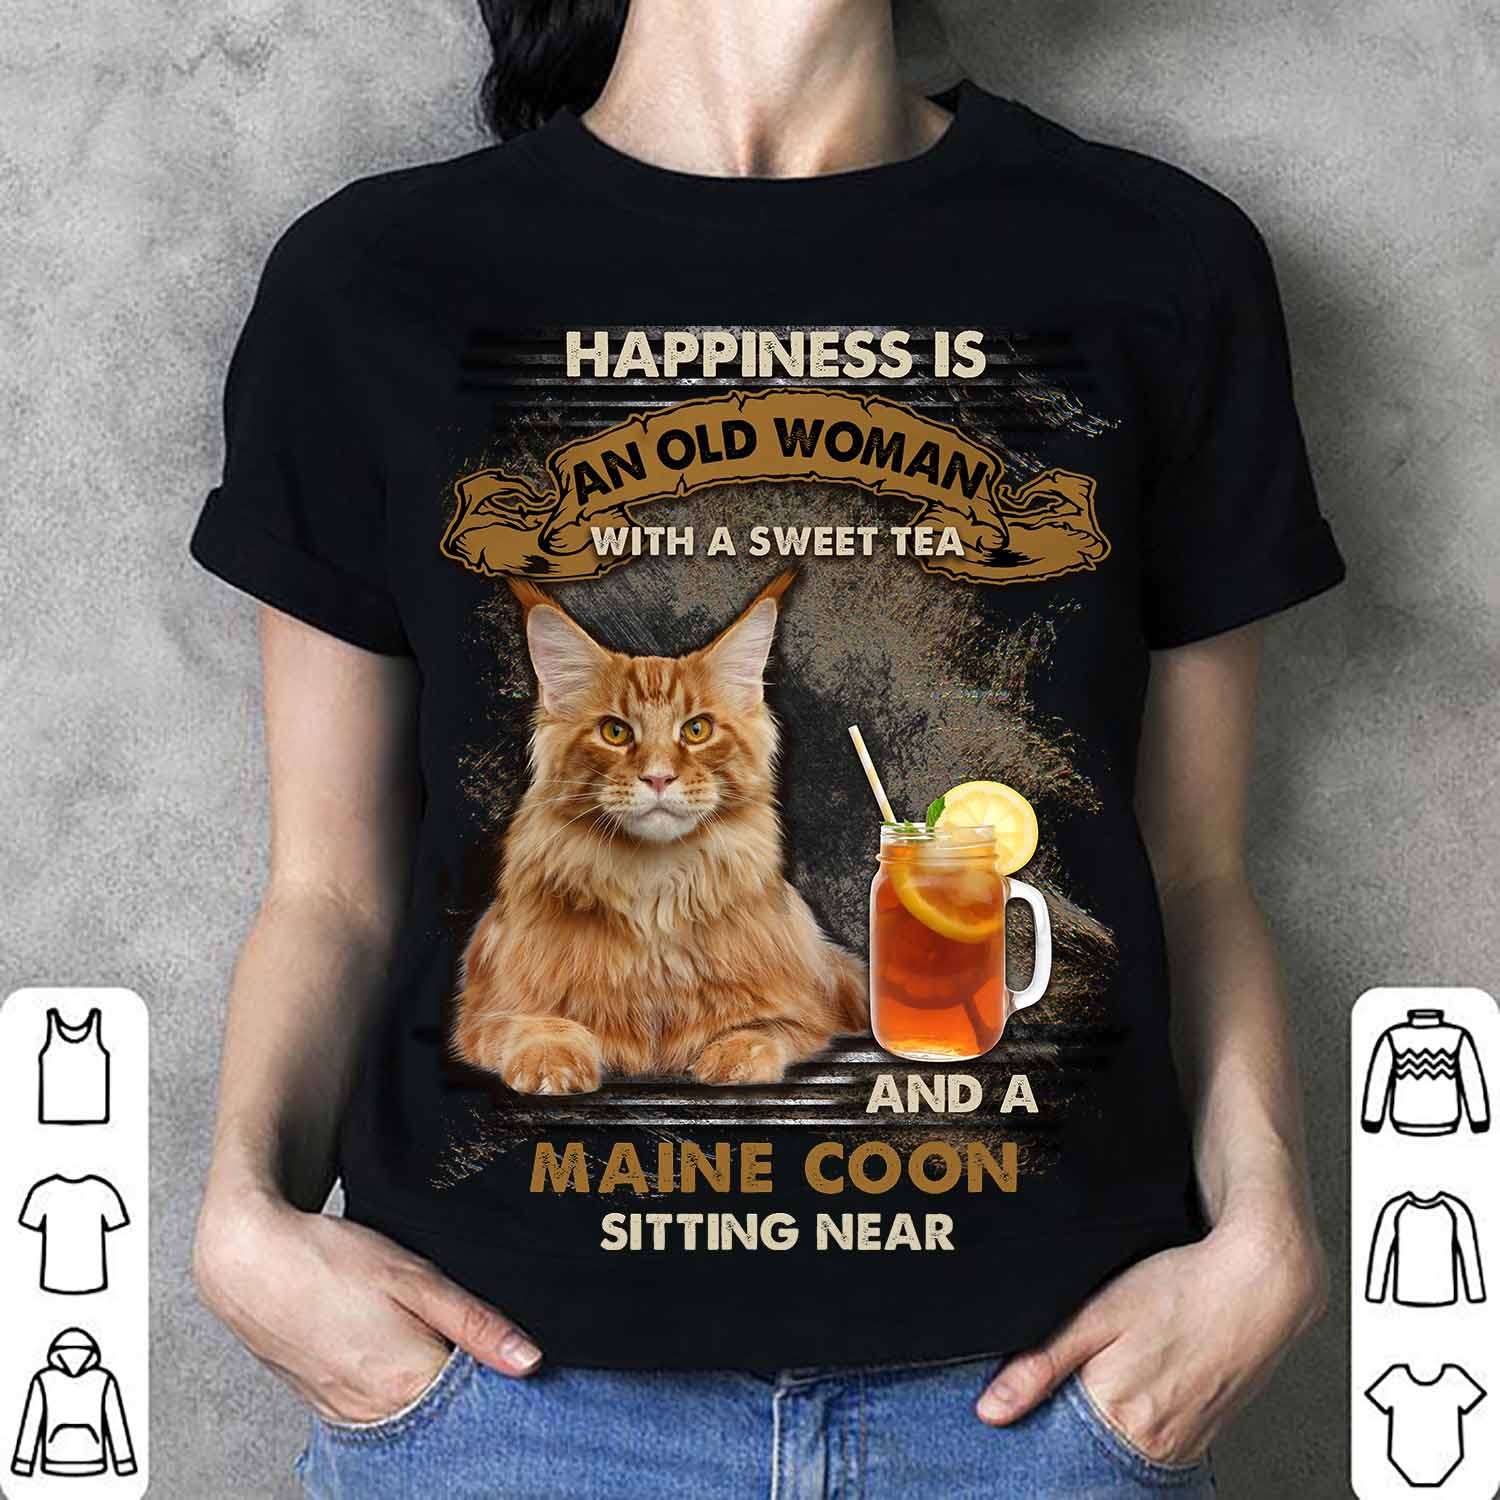 Happiness is an old woman with a sweet tea and a Maine Coon sitting near